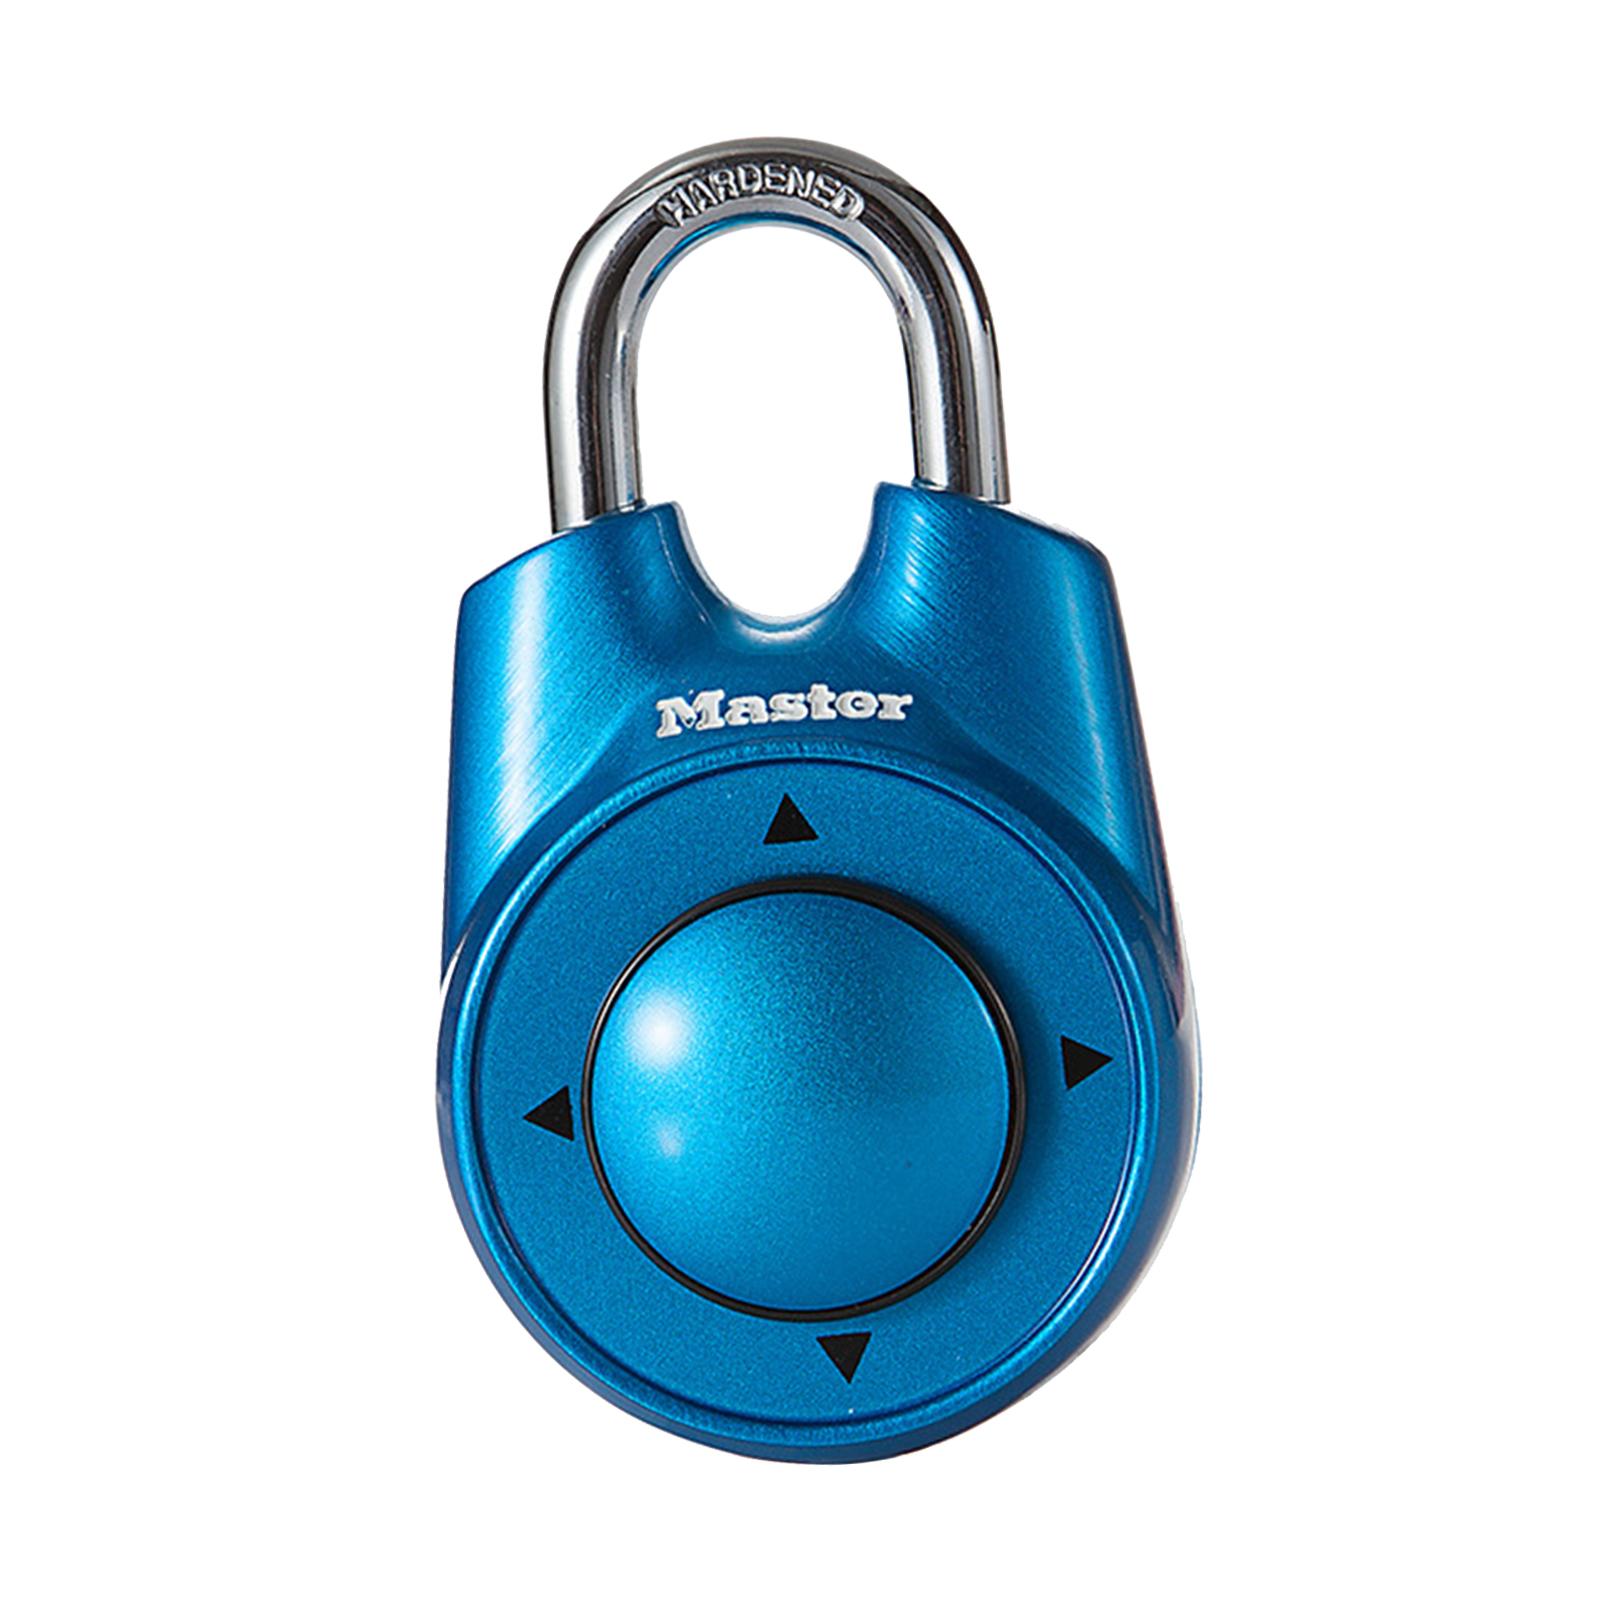 Combination Padlock Portable Travel Padlock for Luggage Fences Going Outside Blue